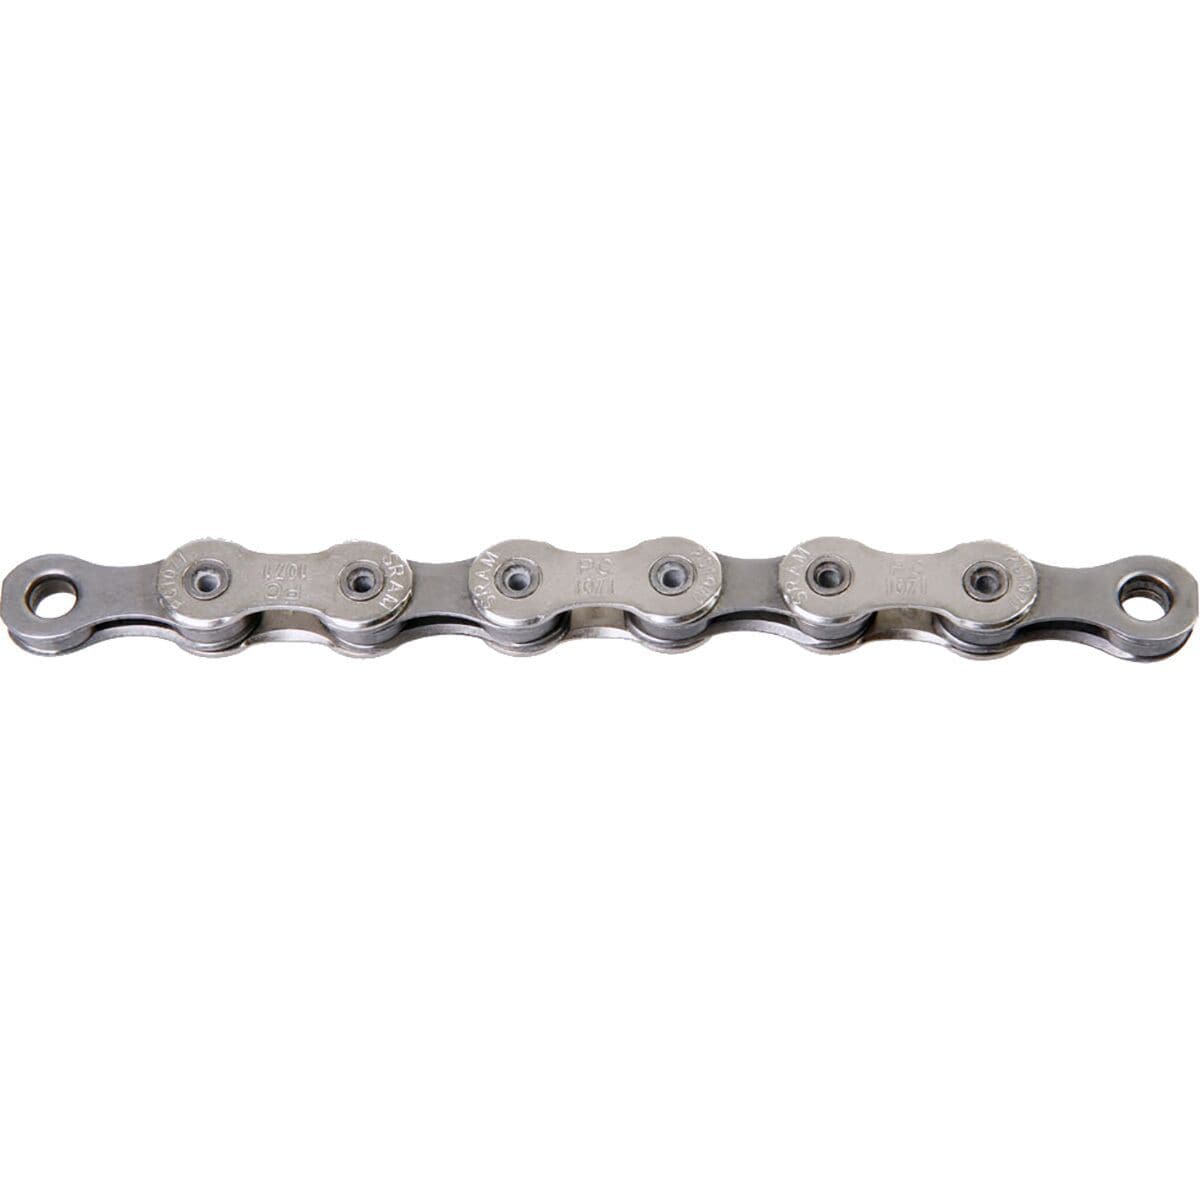 SRAM PC 1071 HollowPin Chain One Color, 114 Links / 10-Speed